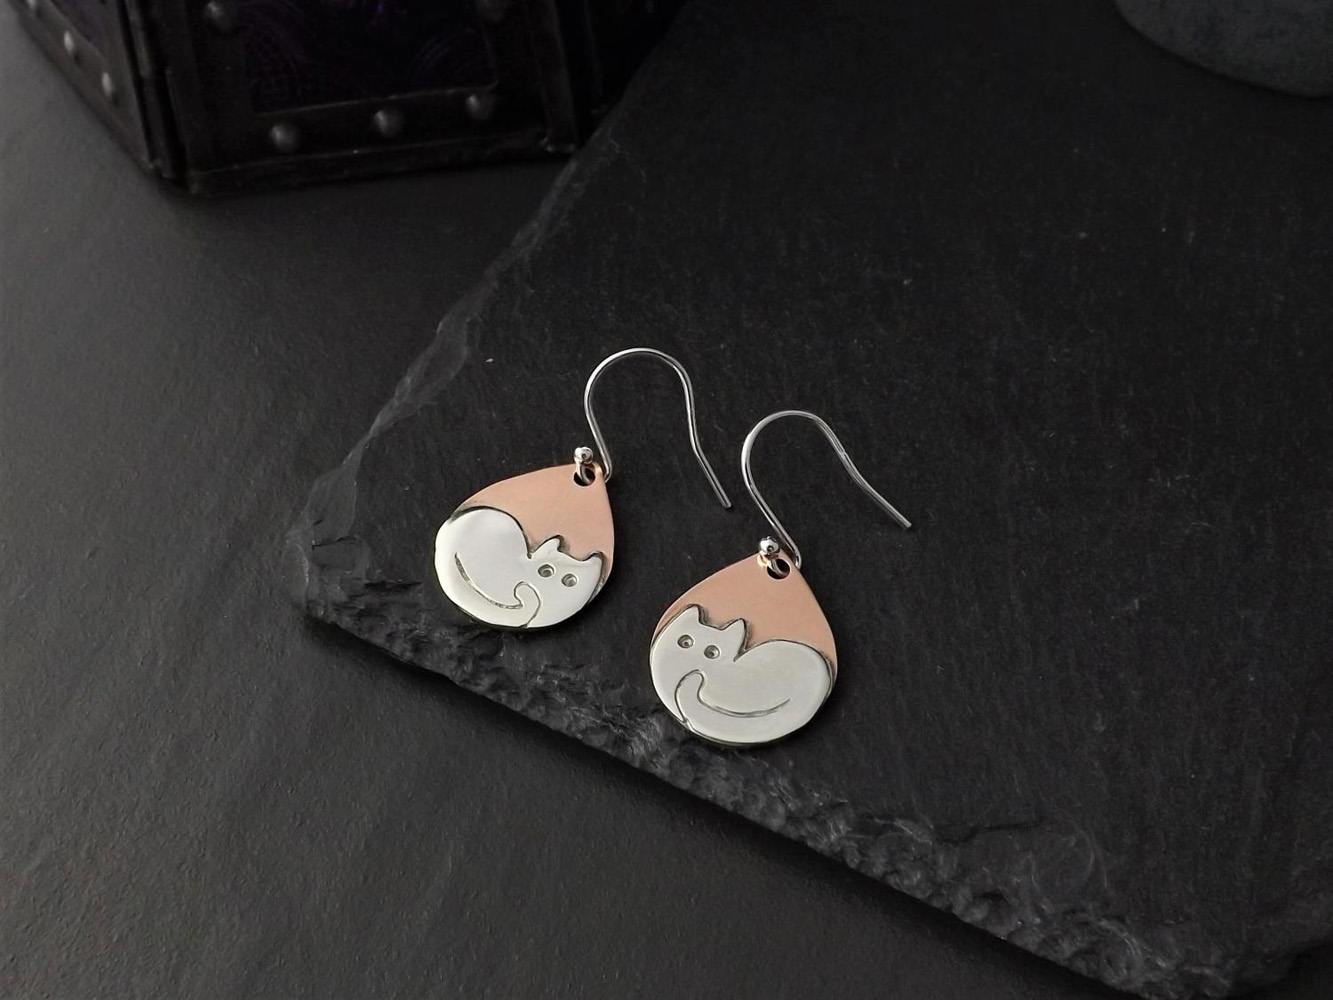 Curled Up Cat Earrings, Handmade Silver and Copper Dangly Earrings on Sterling Silver Ear Wires